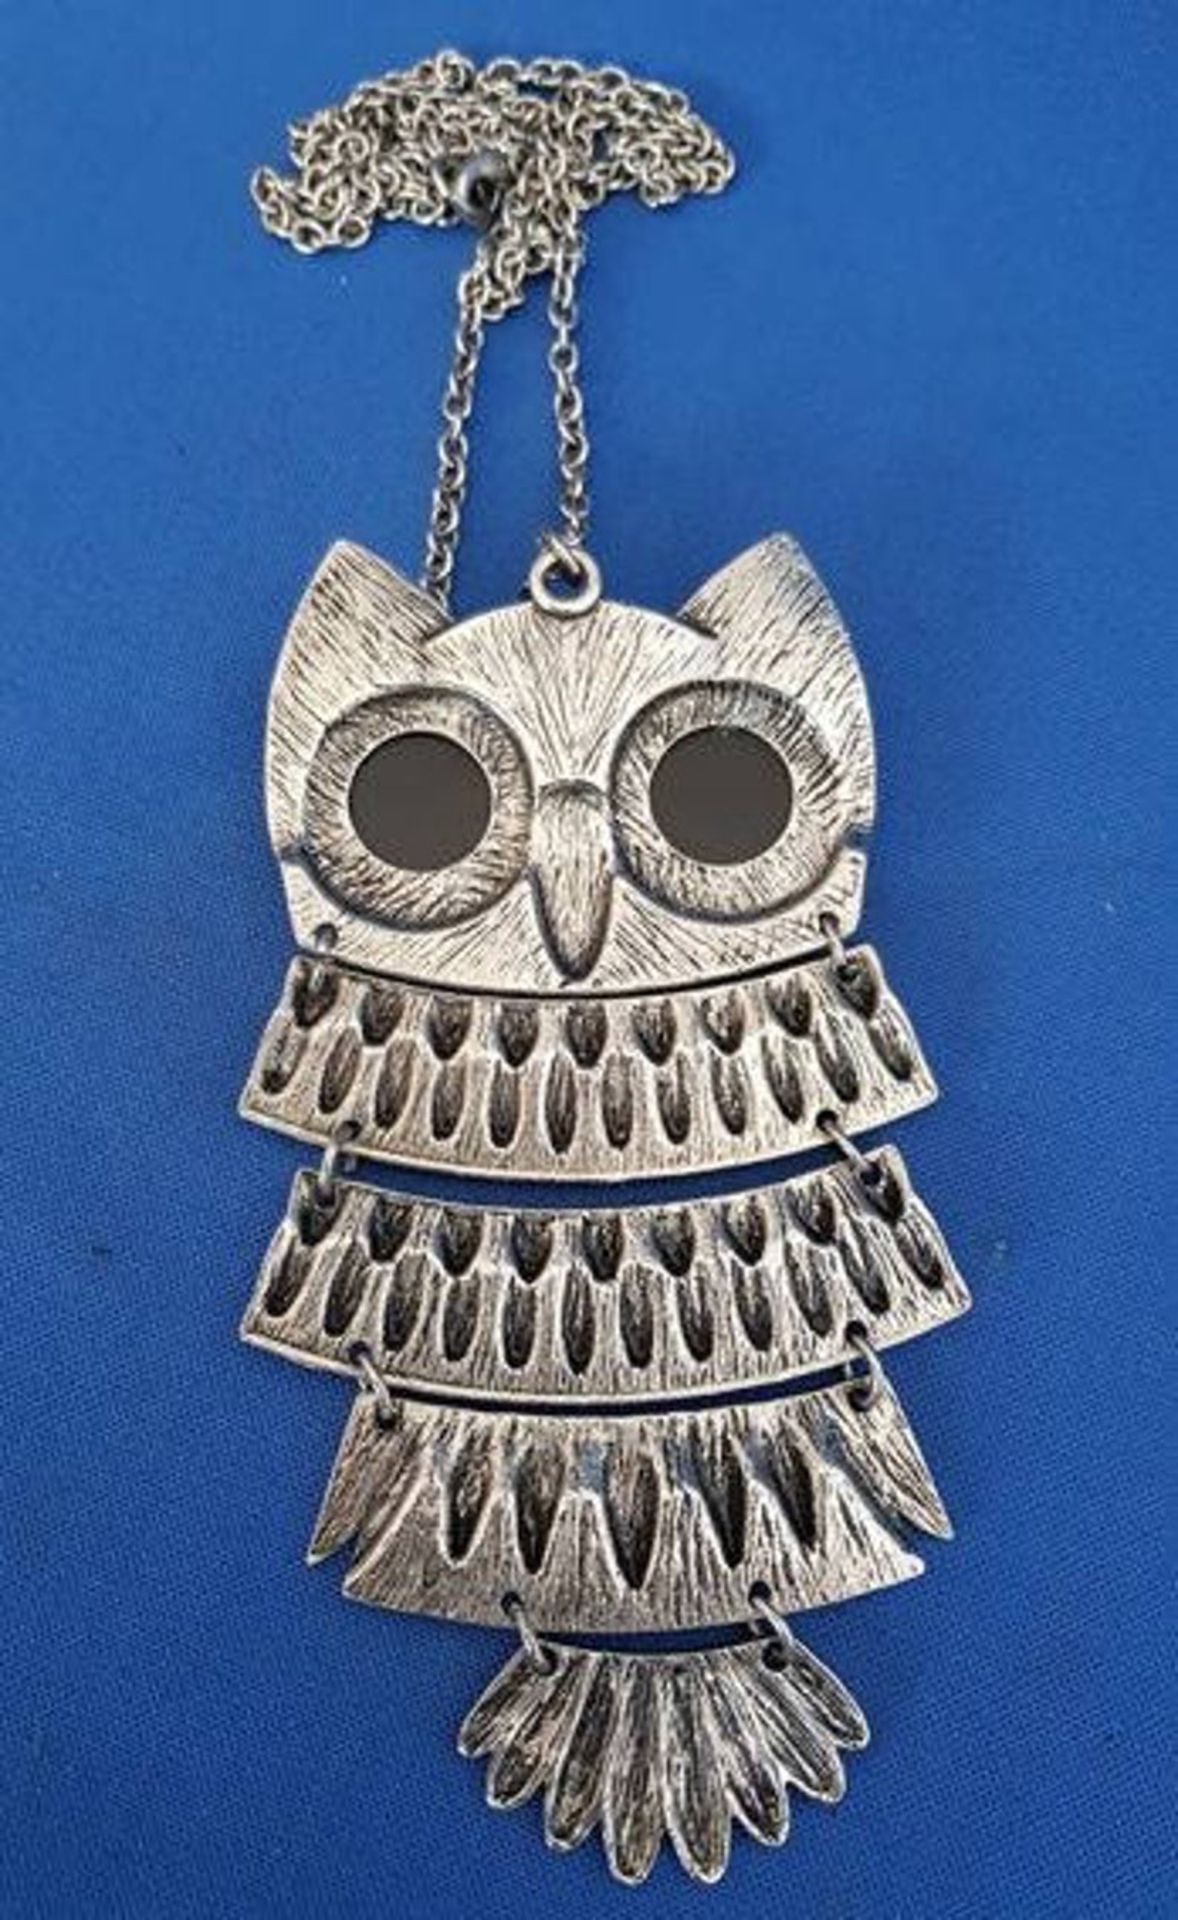 Silver alloy owl pendant necklace, black rhinestone eyes silver-coloured chain - Image 2 of 2